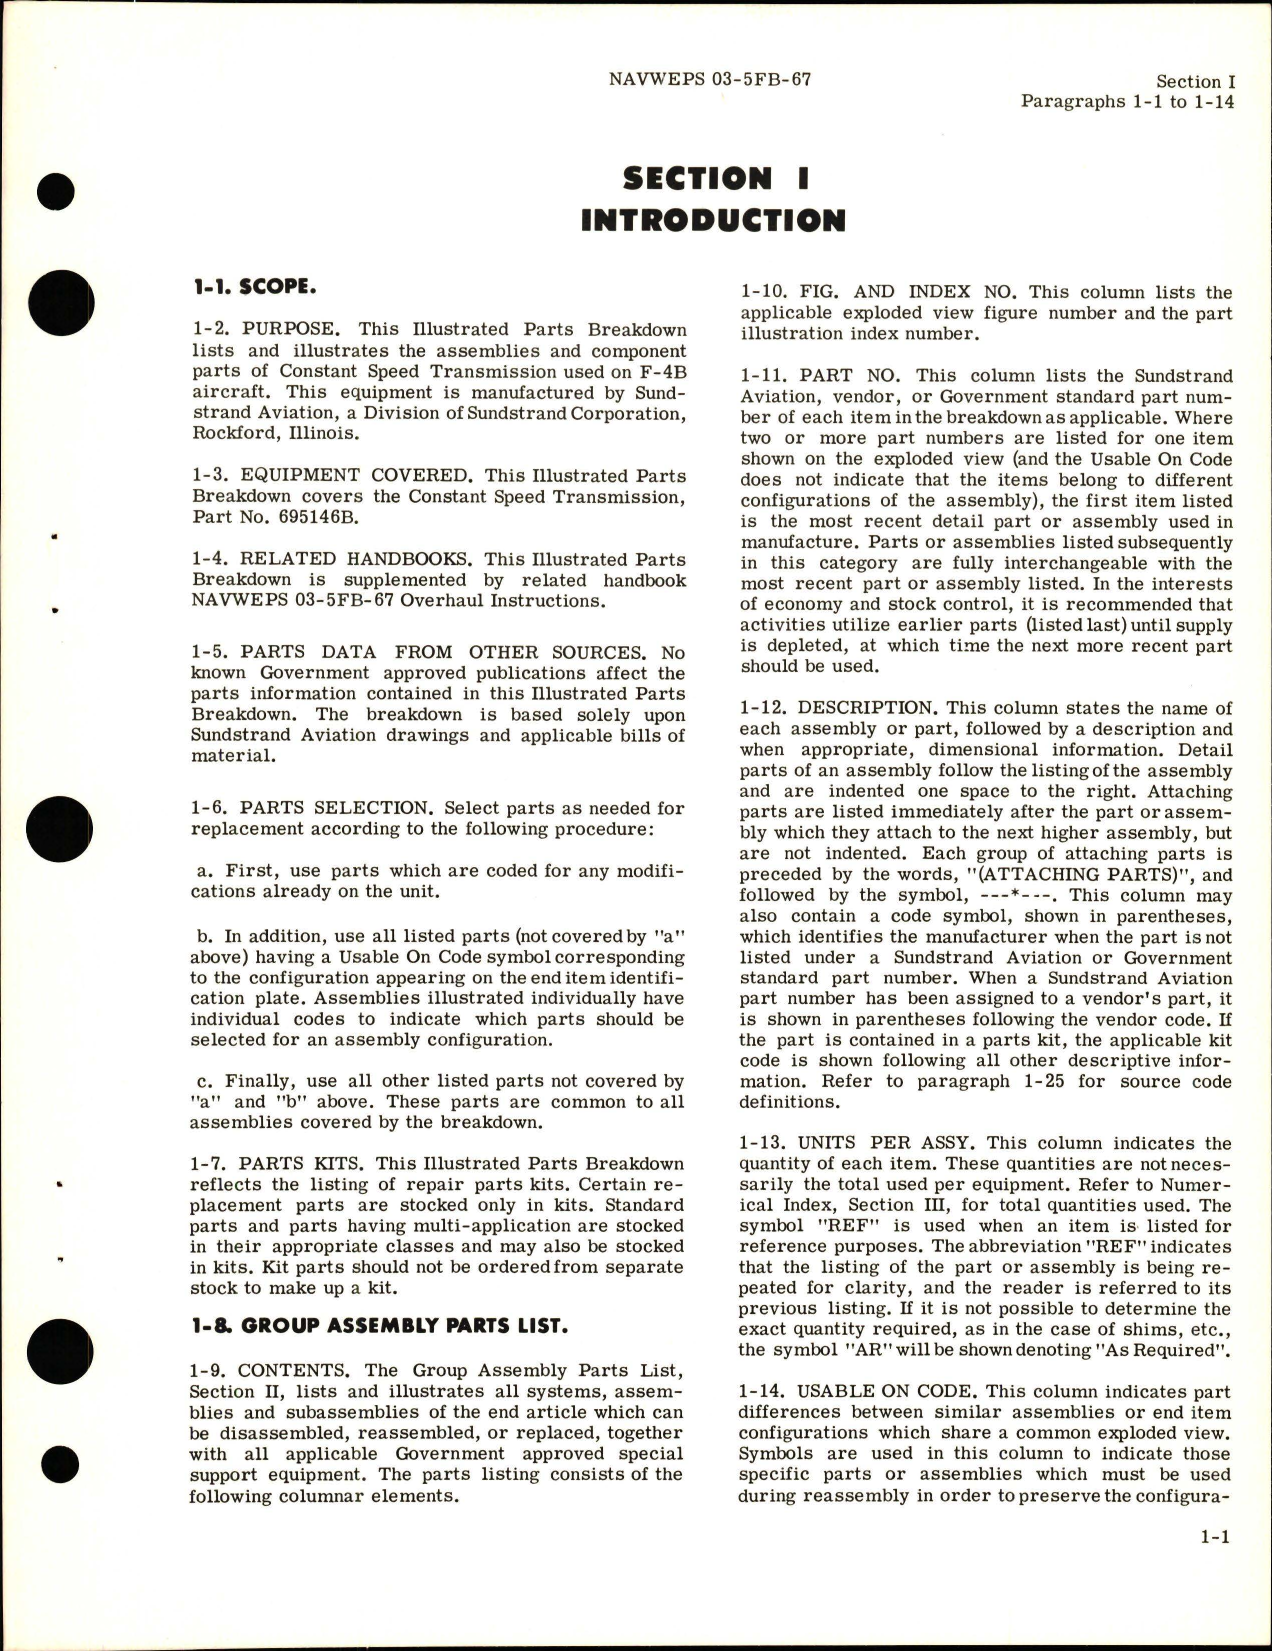 Sample page 5 from AirCorps Library document: Illustrated Parts Breakdown for Constant Speed Transmission - Part 695146B